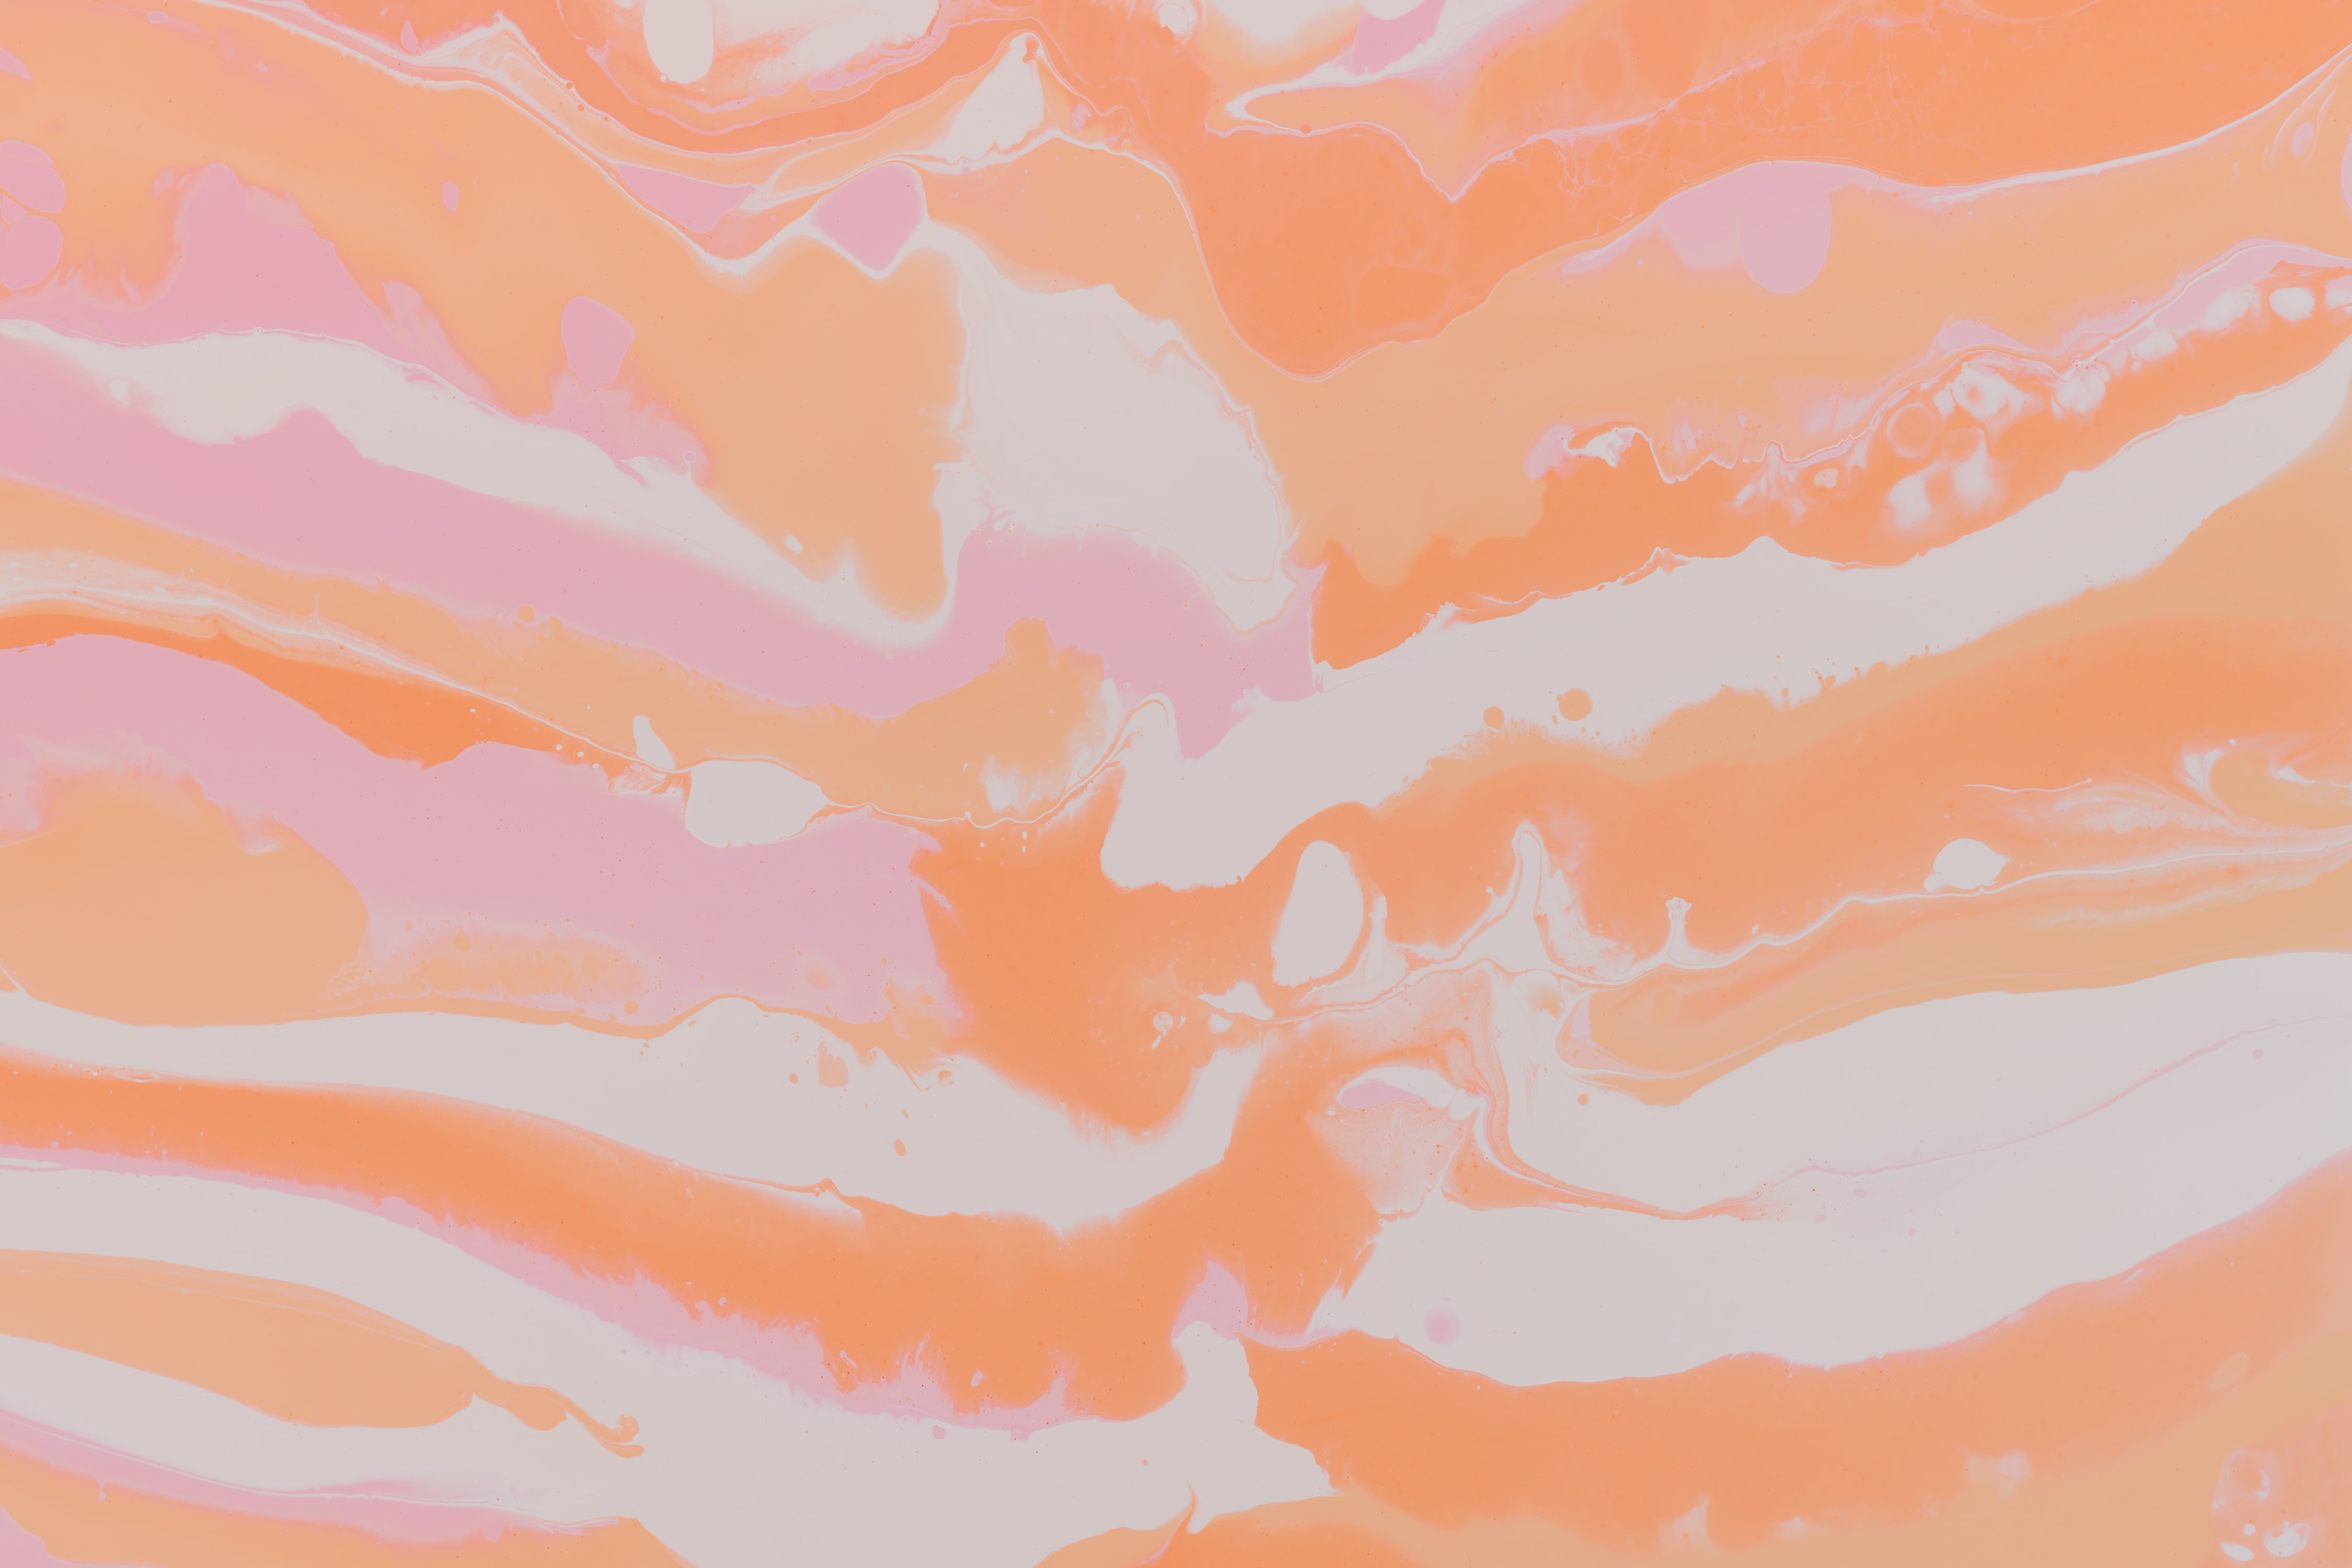 paint, abstract, divorces, liquid, fluid art, faded wallpaper for mobile